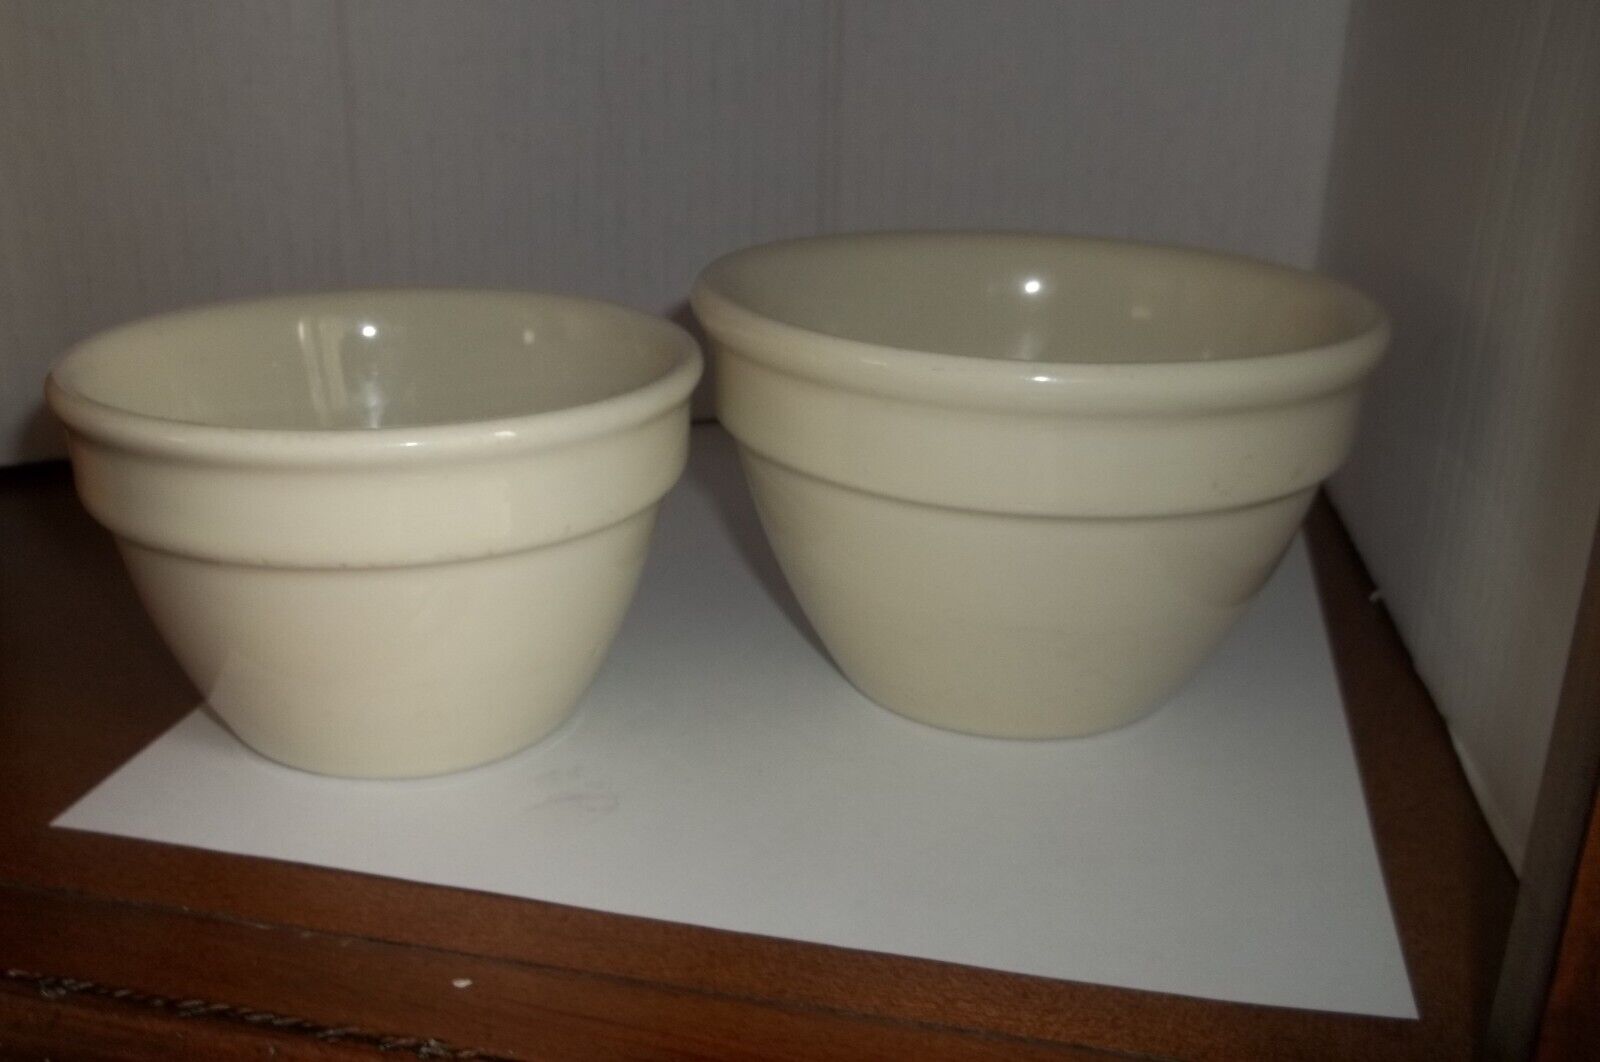 2 Hall Ceramic Mixing Bowls Light Cream - #1091 & #1092 - Made in USA - VINTAGE